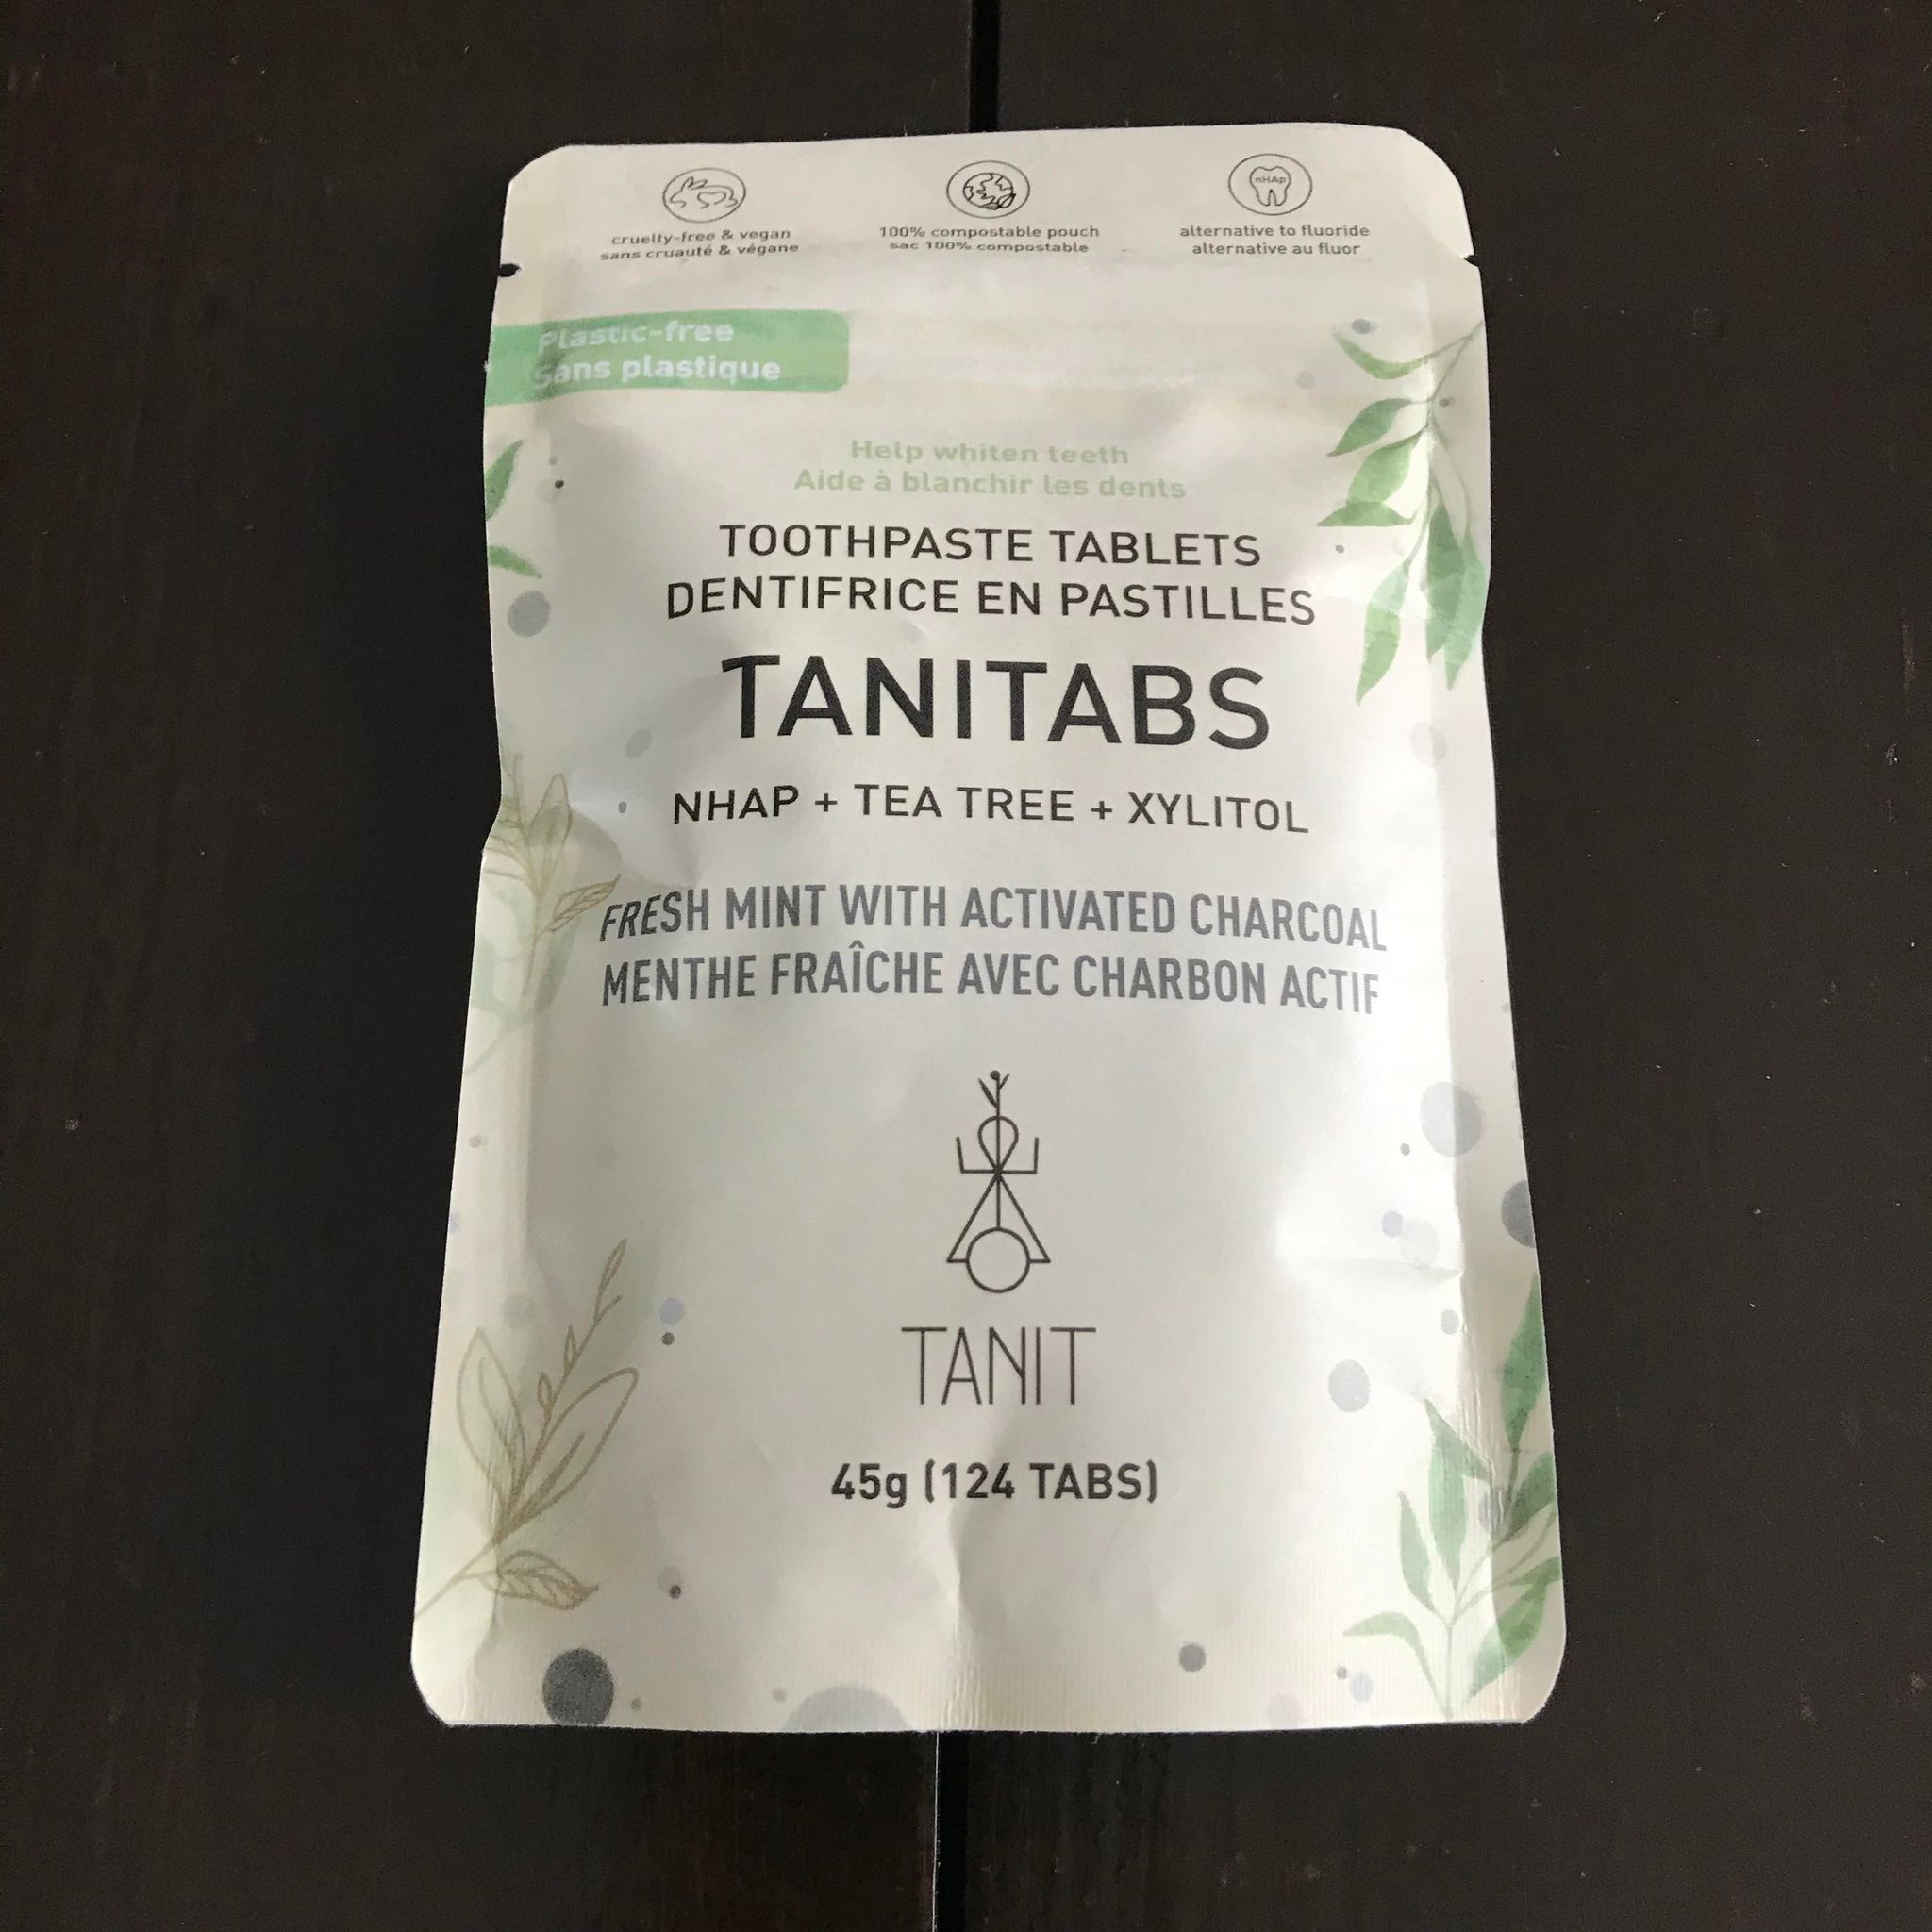 Canadian made fresh mint with activated charcoal Tanitabs in a 45g (124 tabs) compostable pouch